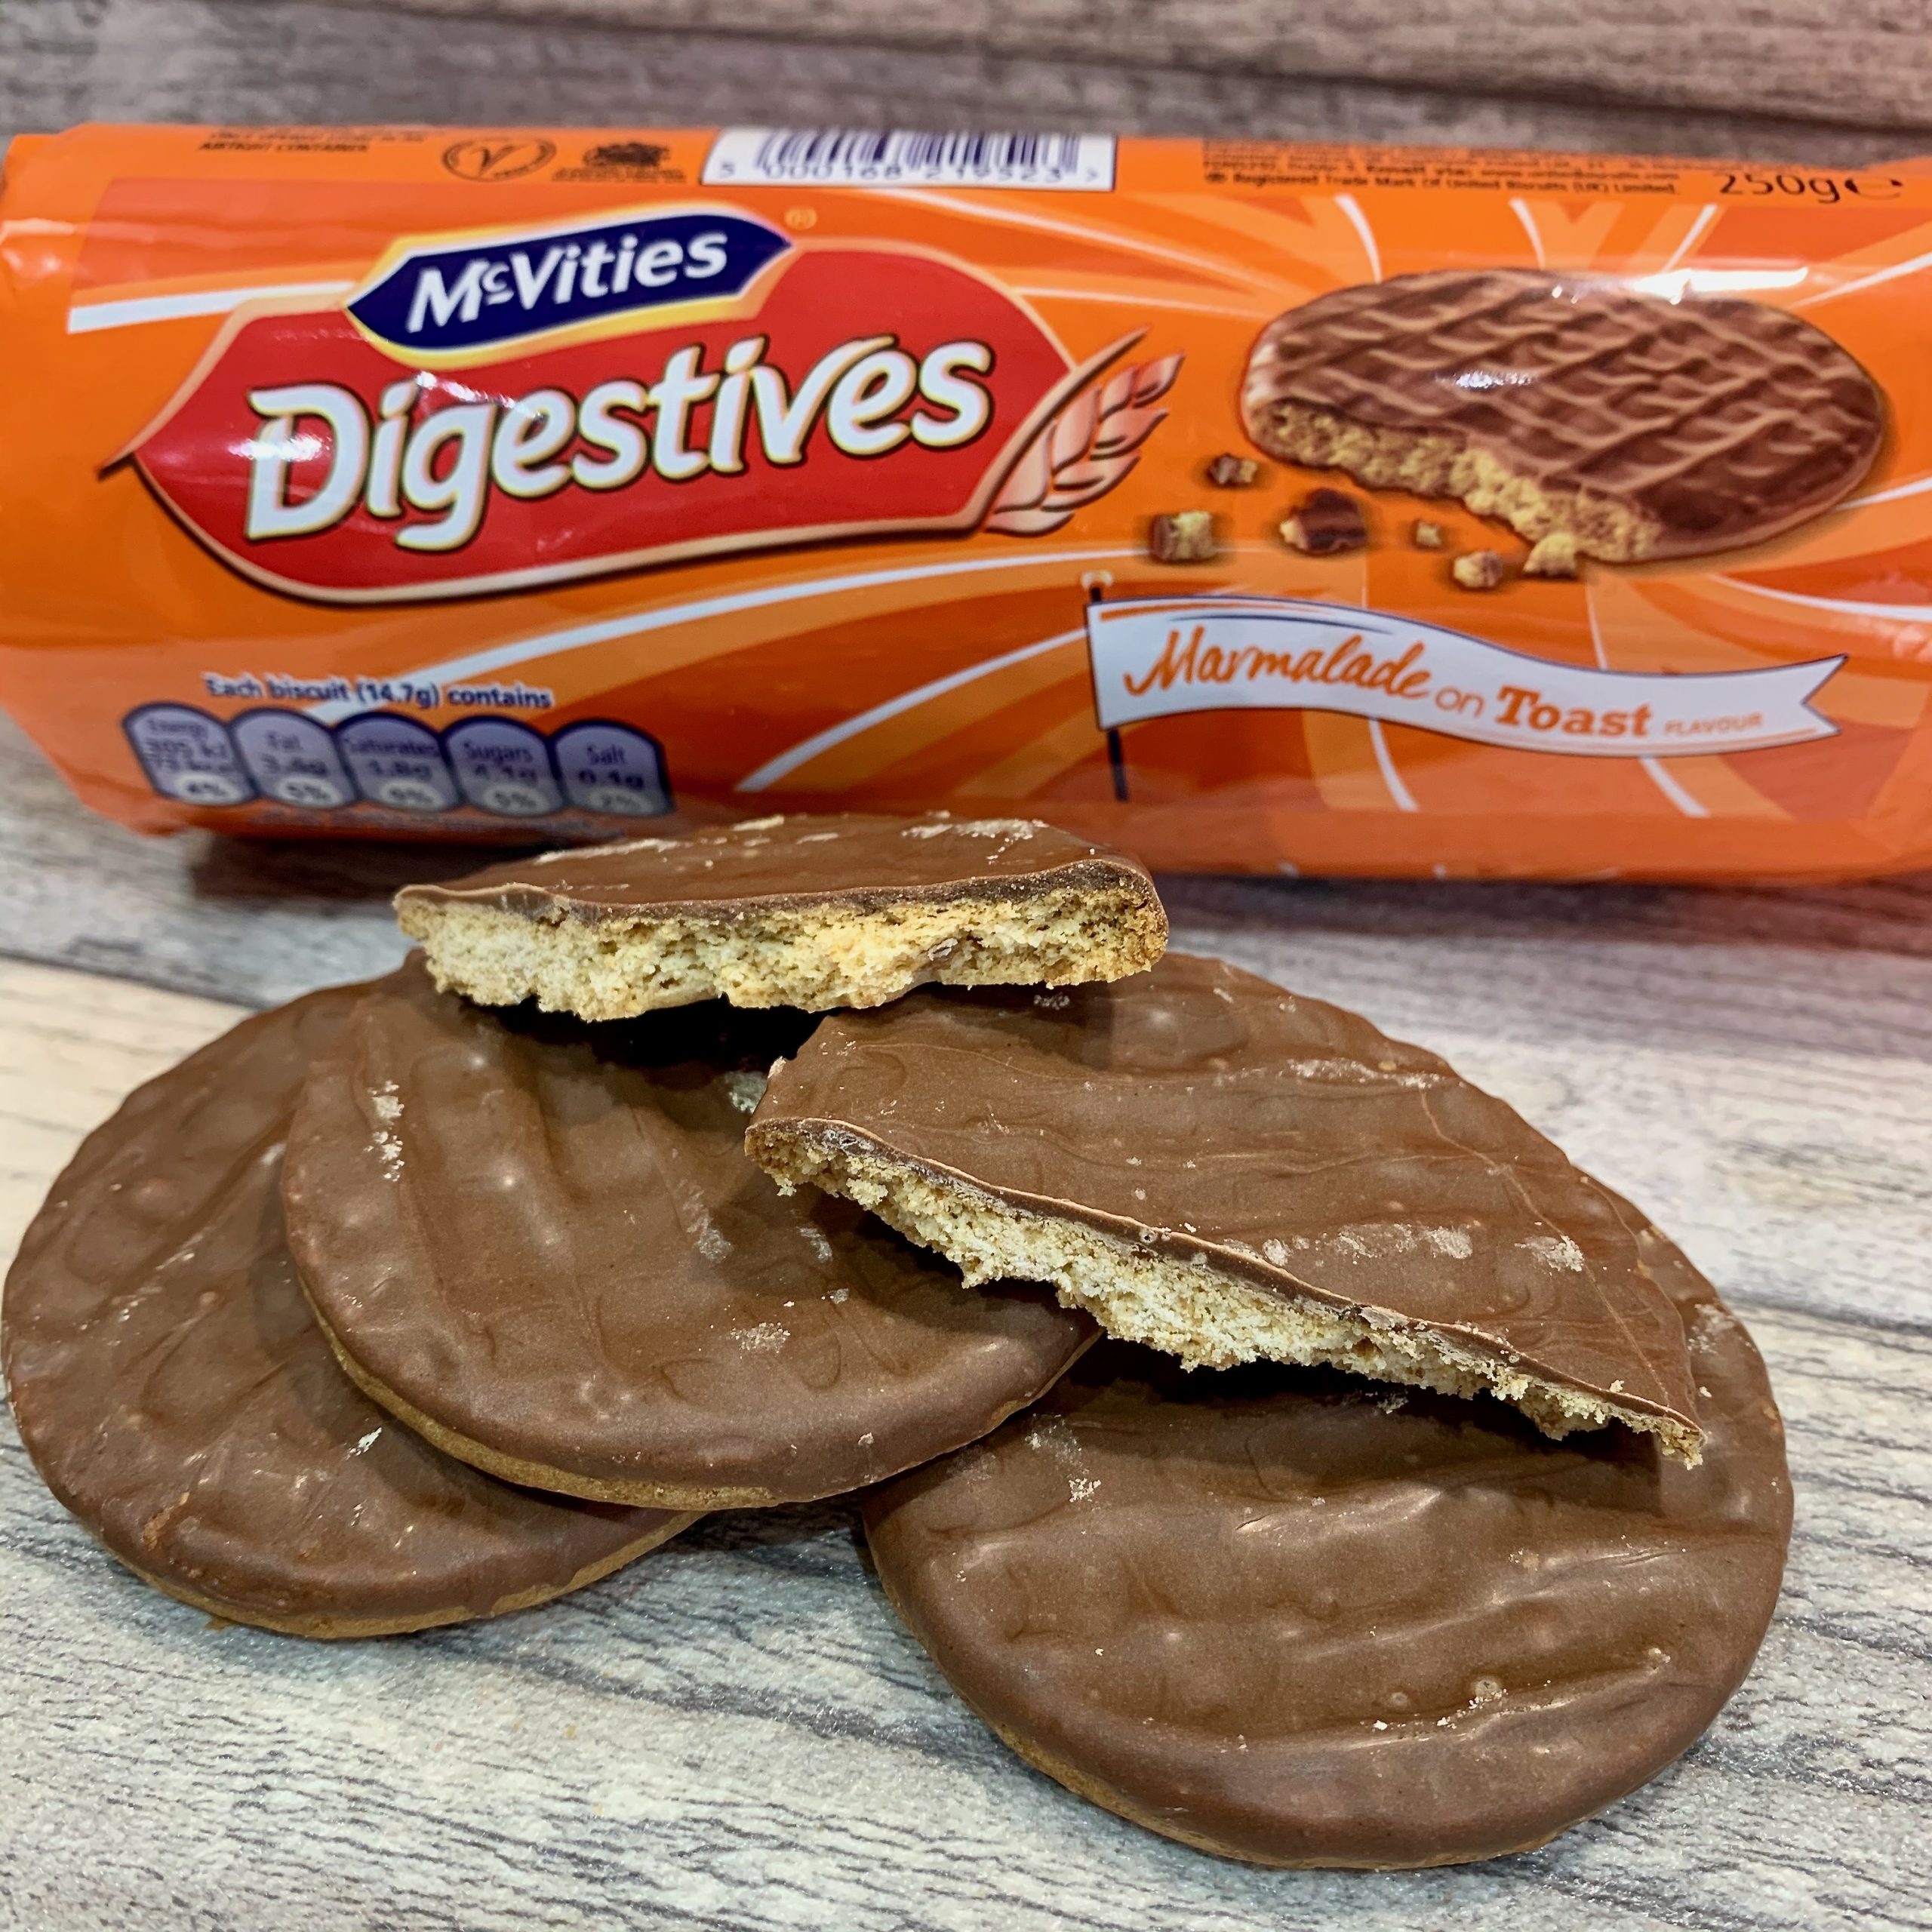 McVities Marmalade on Toast Digestives Review Biscuits